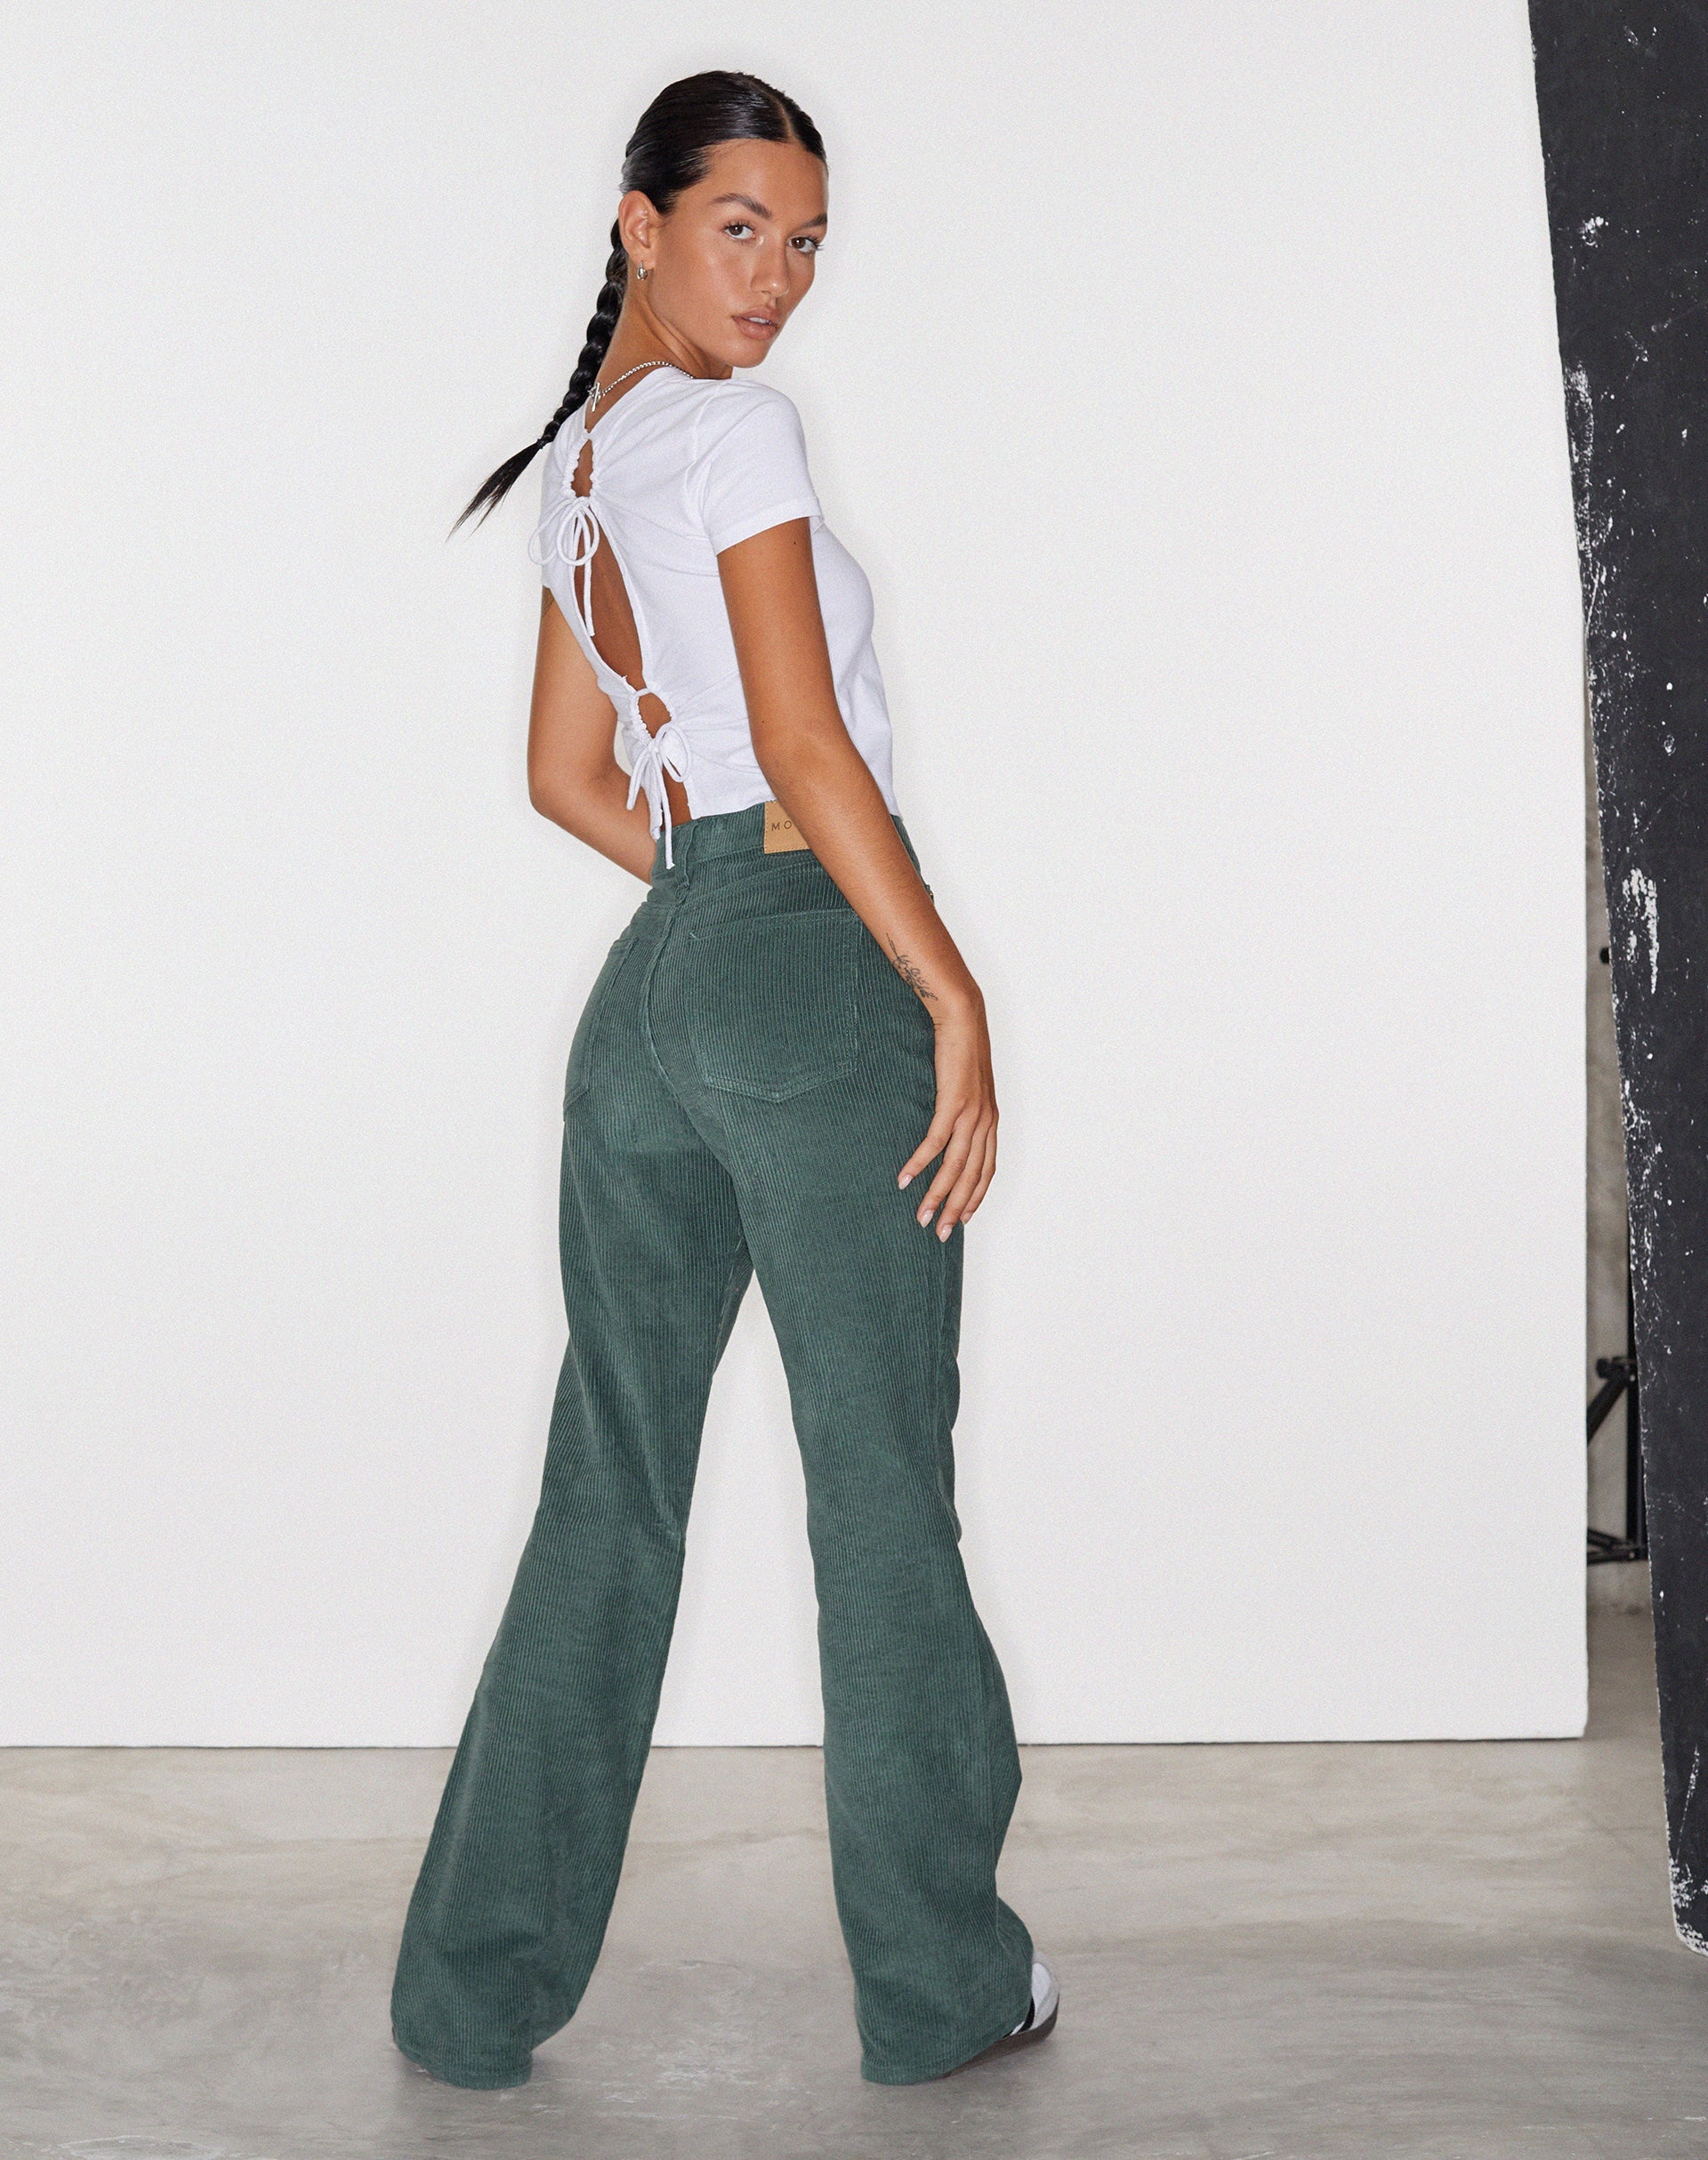 Image of MOTEL X OLIVIA NEILL Bootleg Jeans in Cord Green